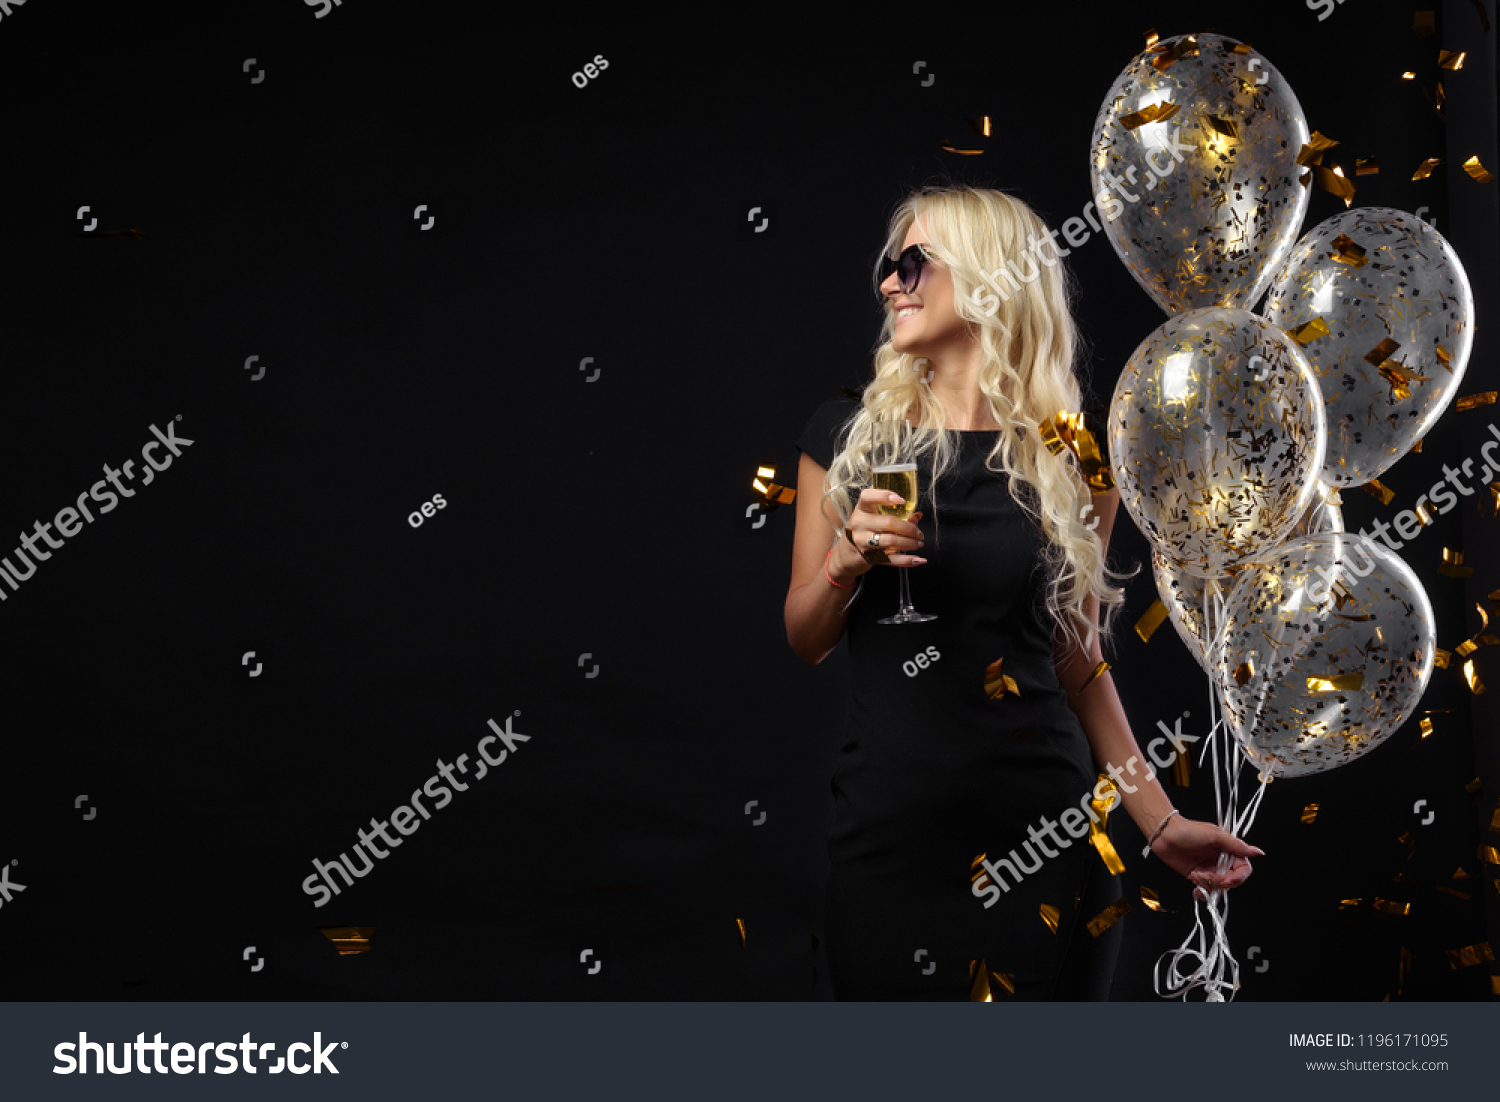 Brightfull expressions of happy emotions of  amazing blonde girl celebrating party on black background. Luxury black dresses, smiling, a glass of champagne, golden tinsels,  balloons, long curly hair #1196171095